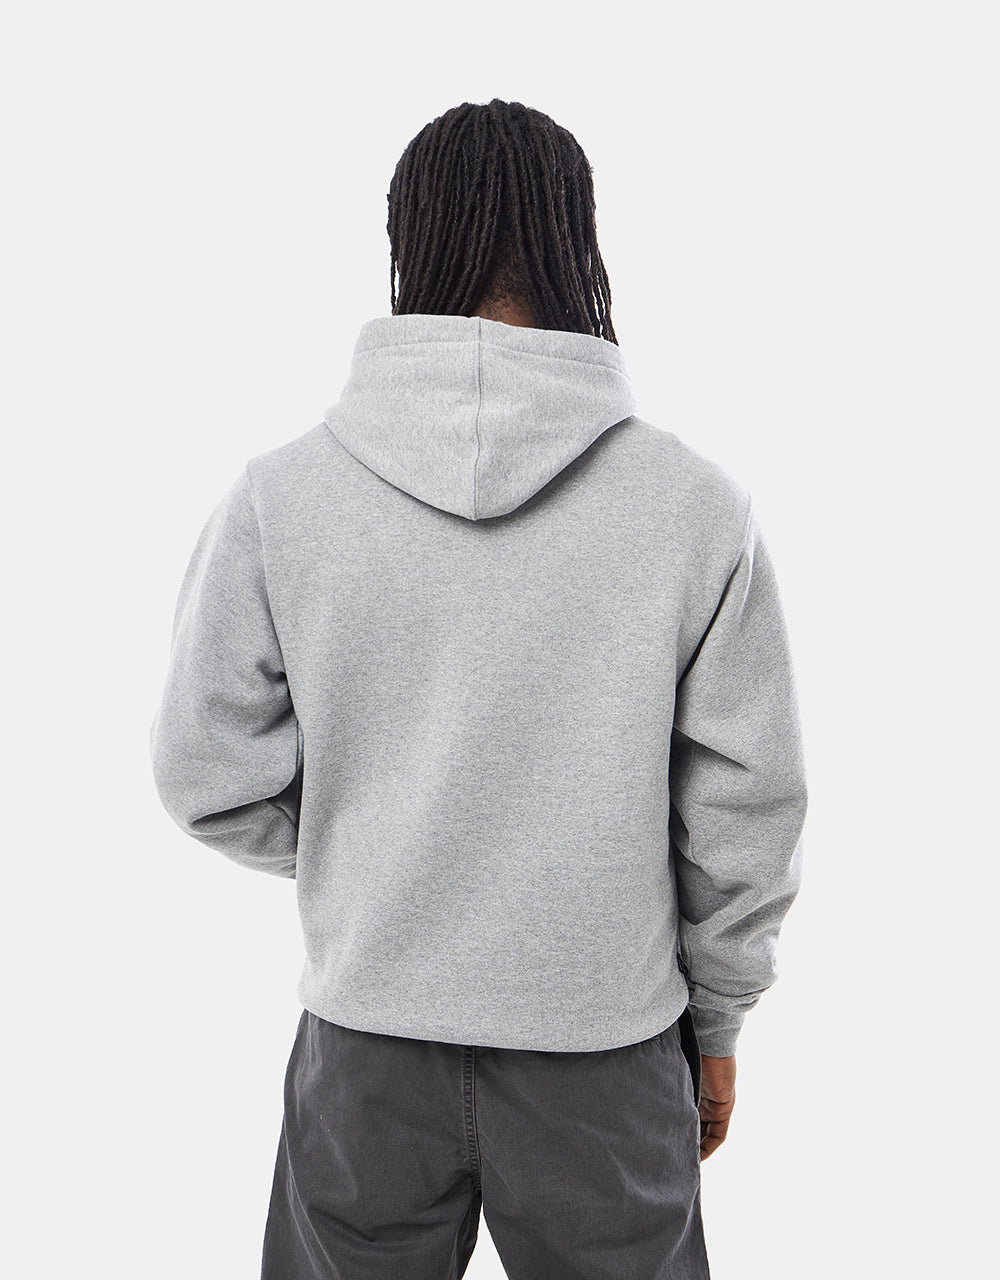 Vans Skate Classics Patch Pullover Hoodie - Cement Heather